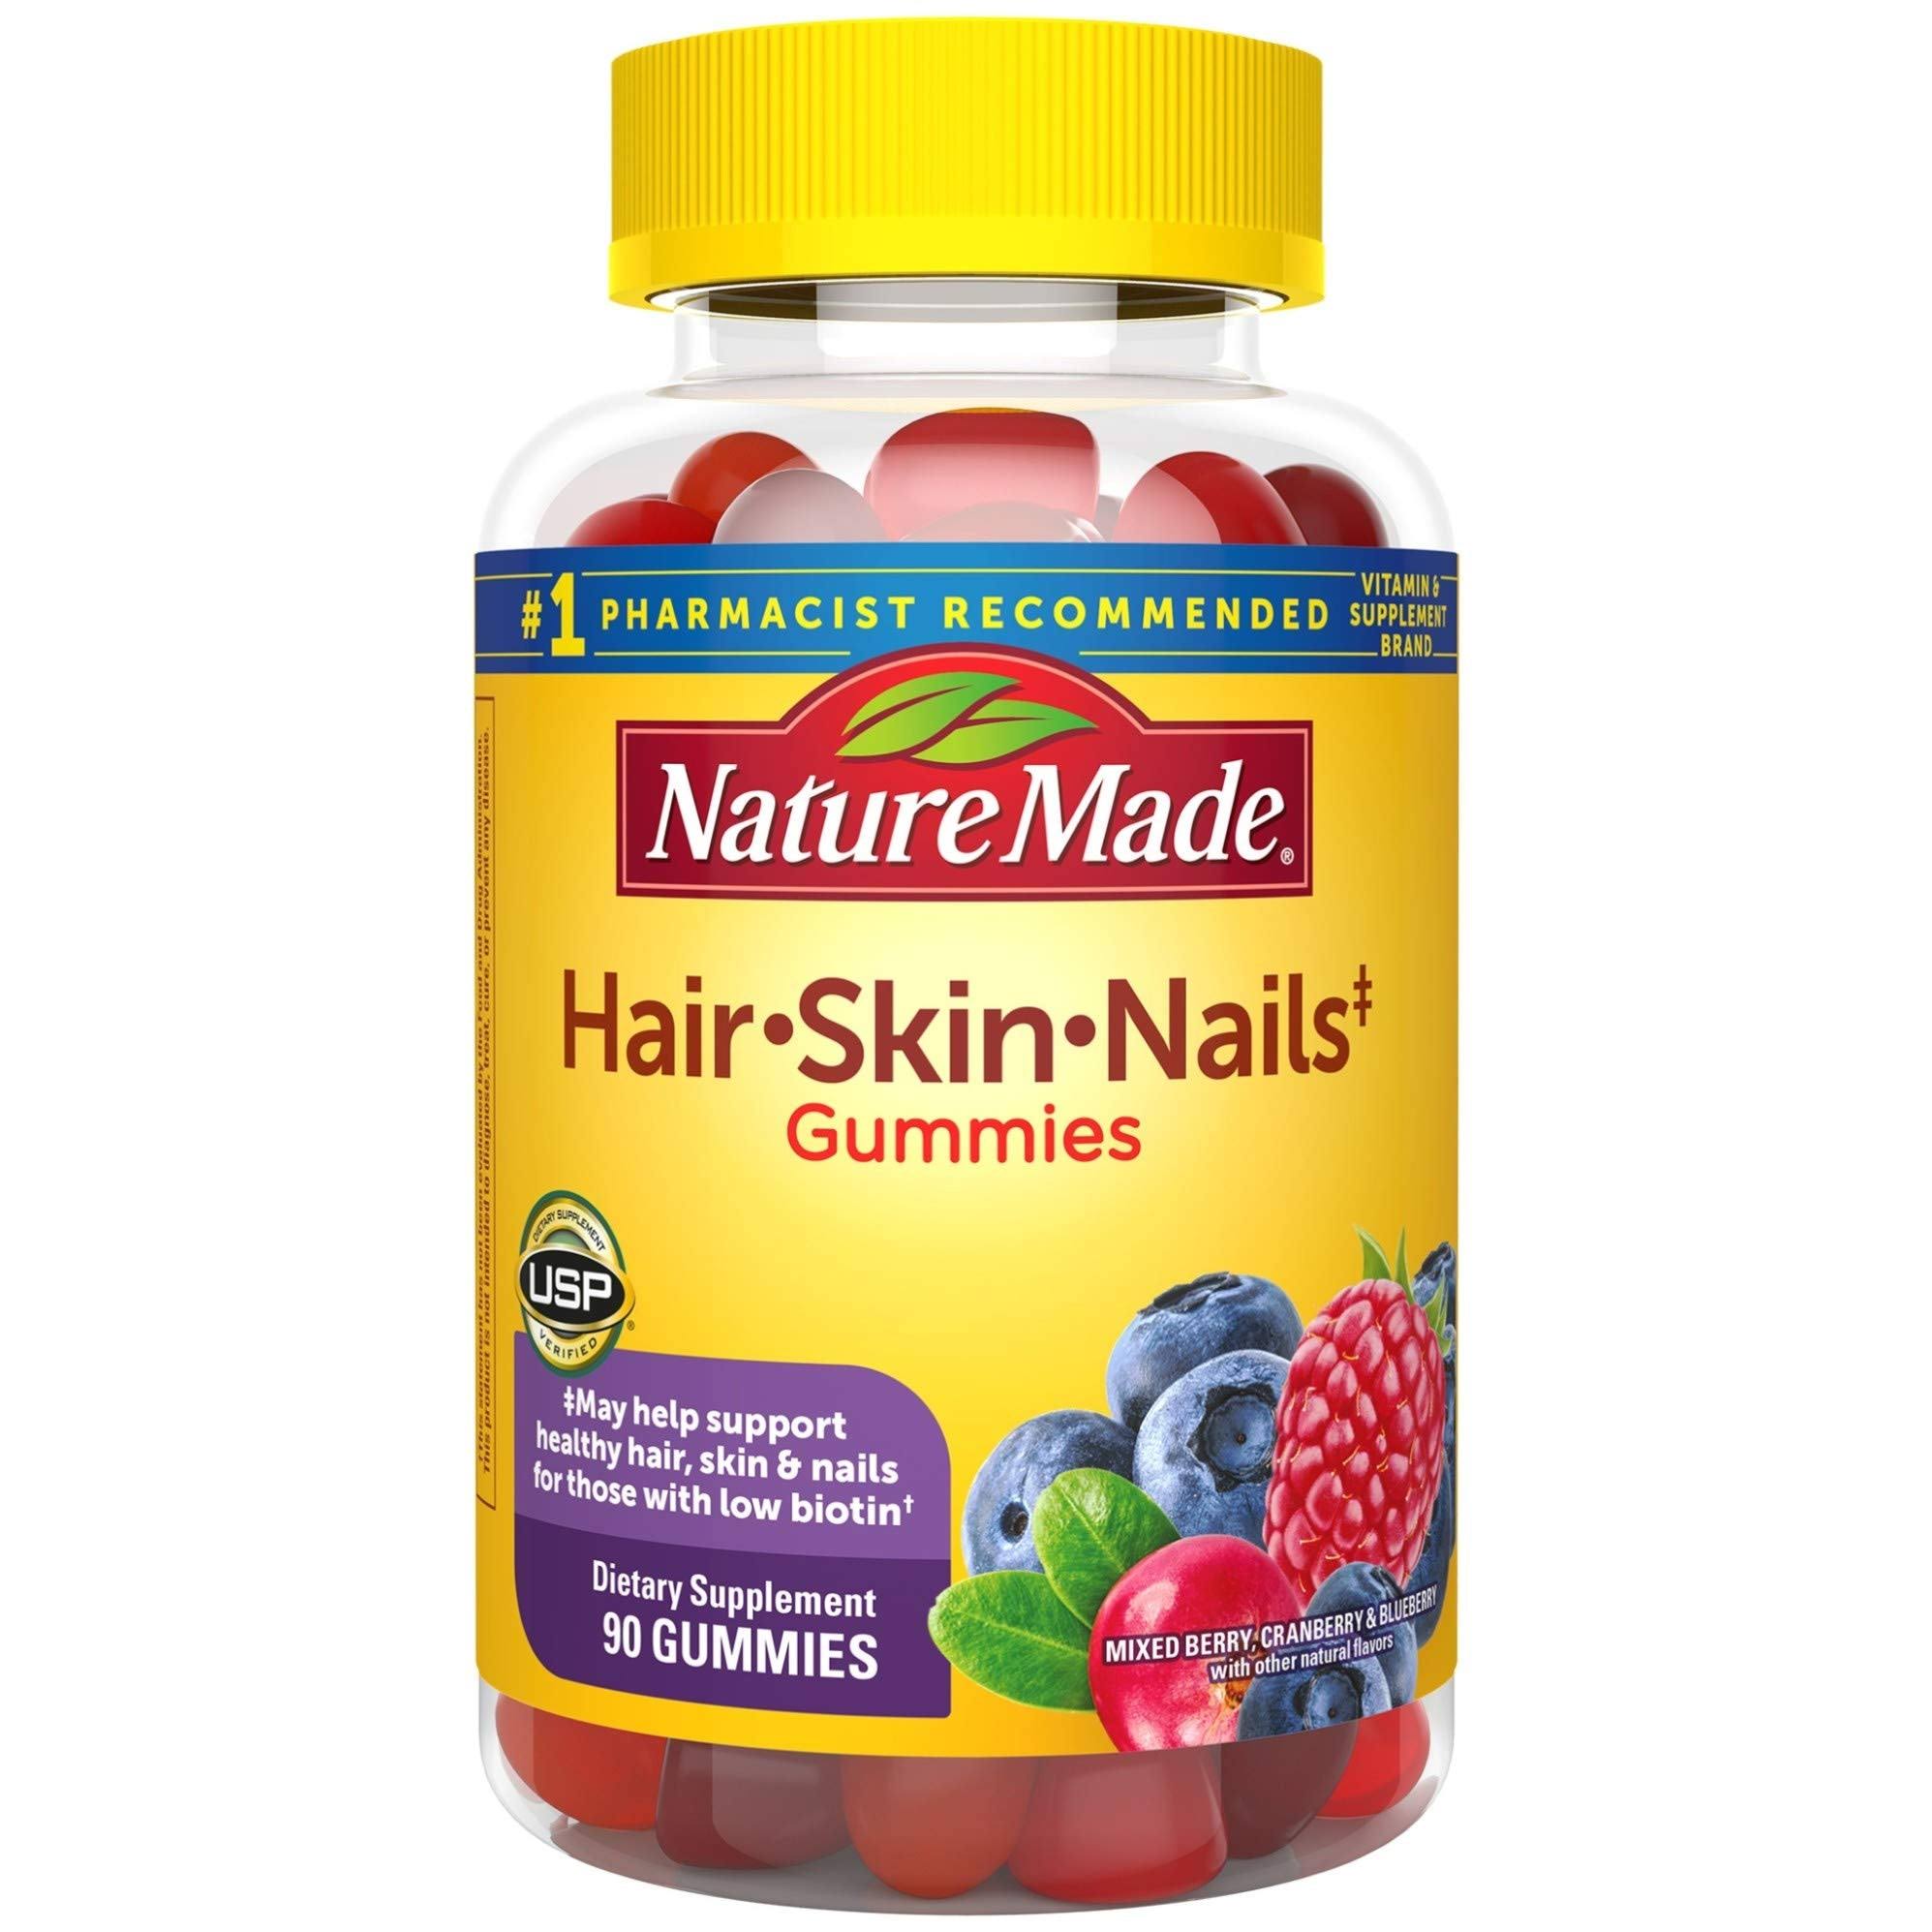 Nature Made Nails Adult Gummies - Mixed Berry, Cranberry and Blueberry, 90ct